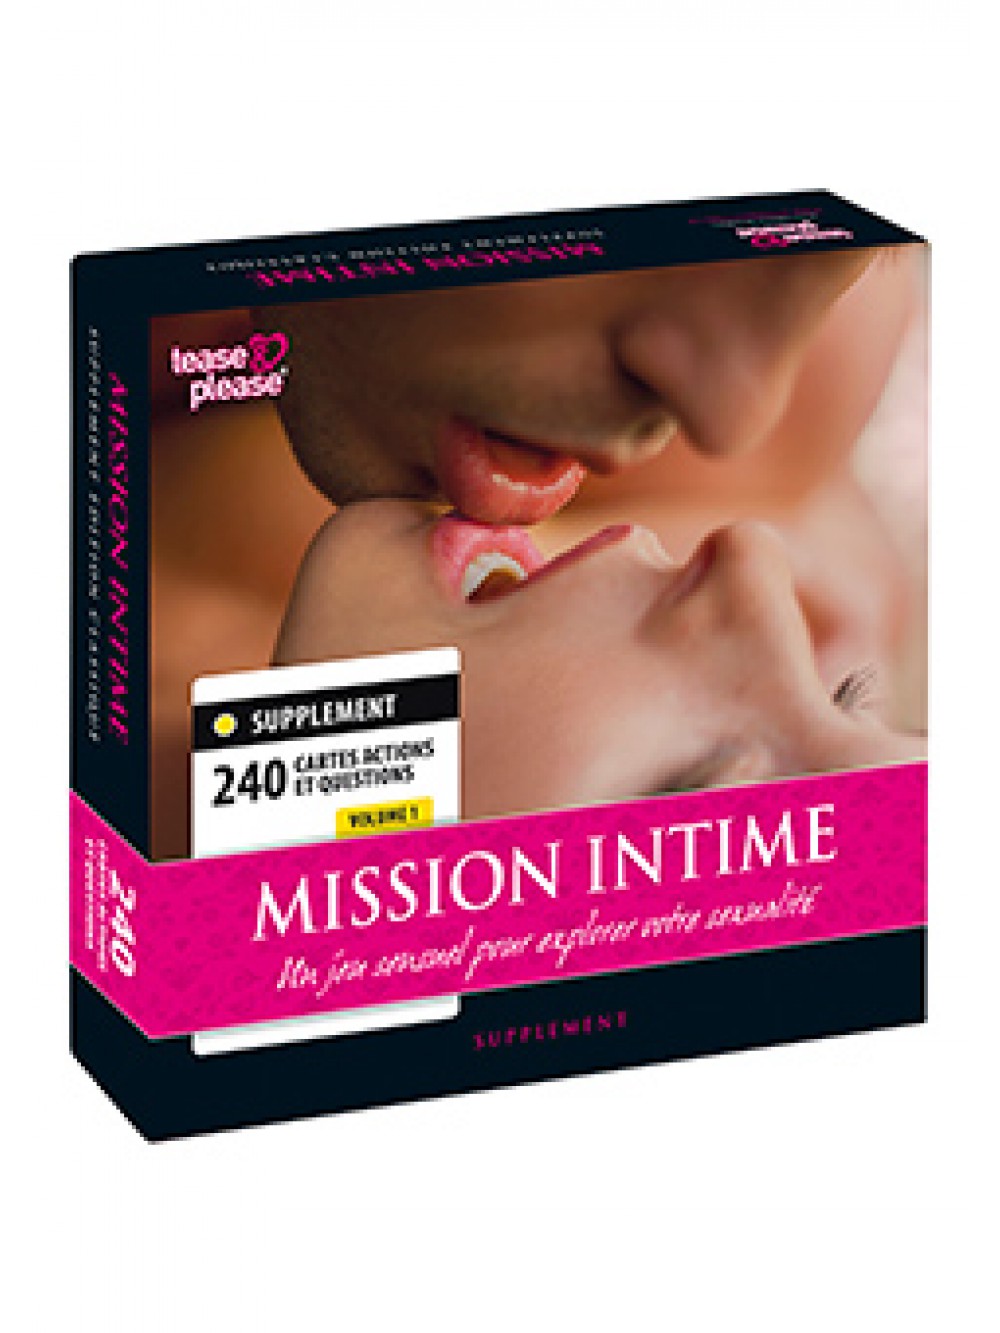 NEW MISSION INTIME SUPPLEMENT VOL 1 8717703521757